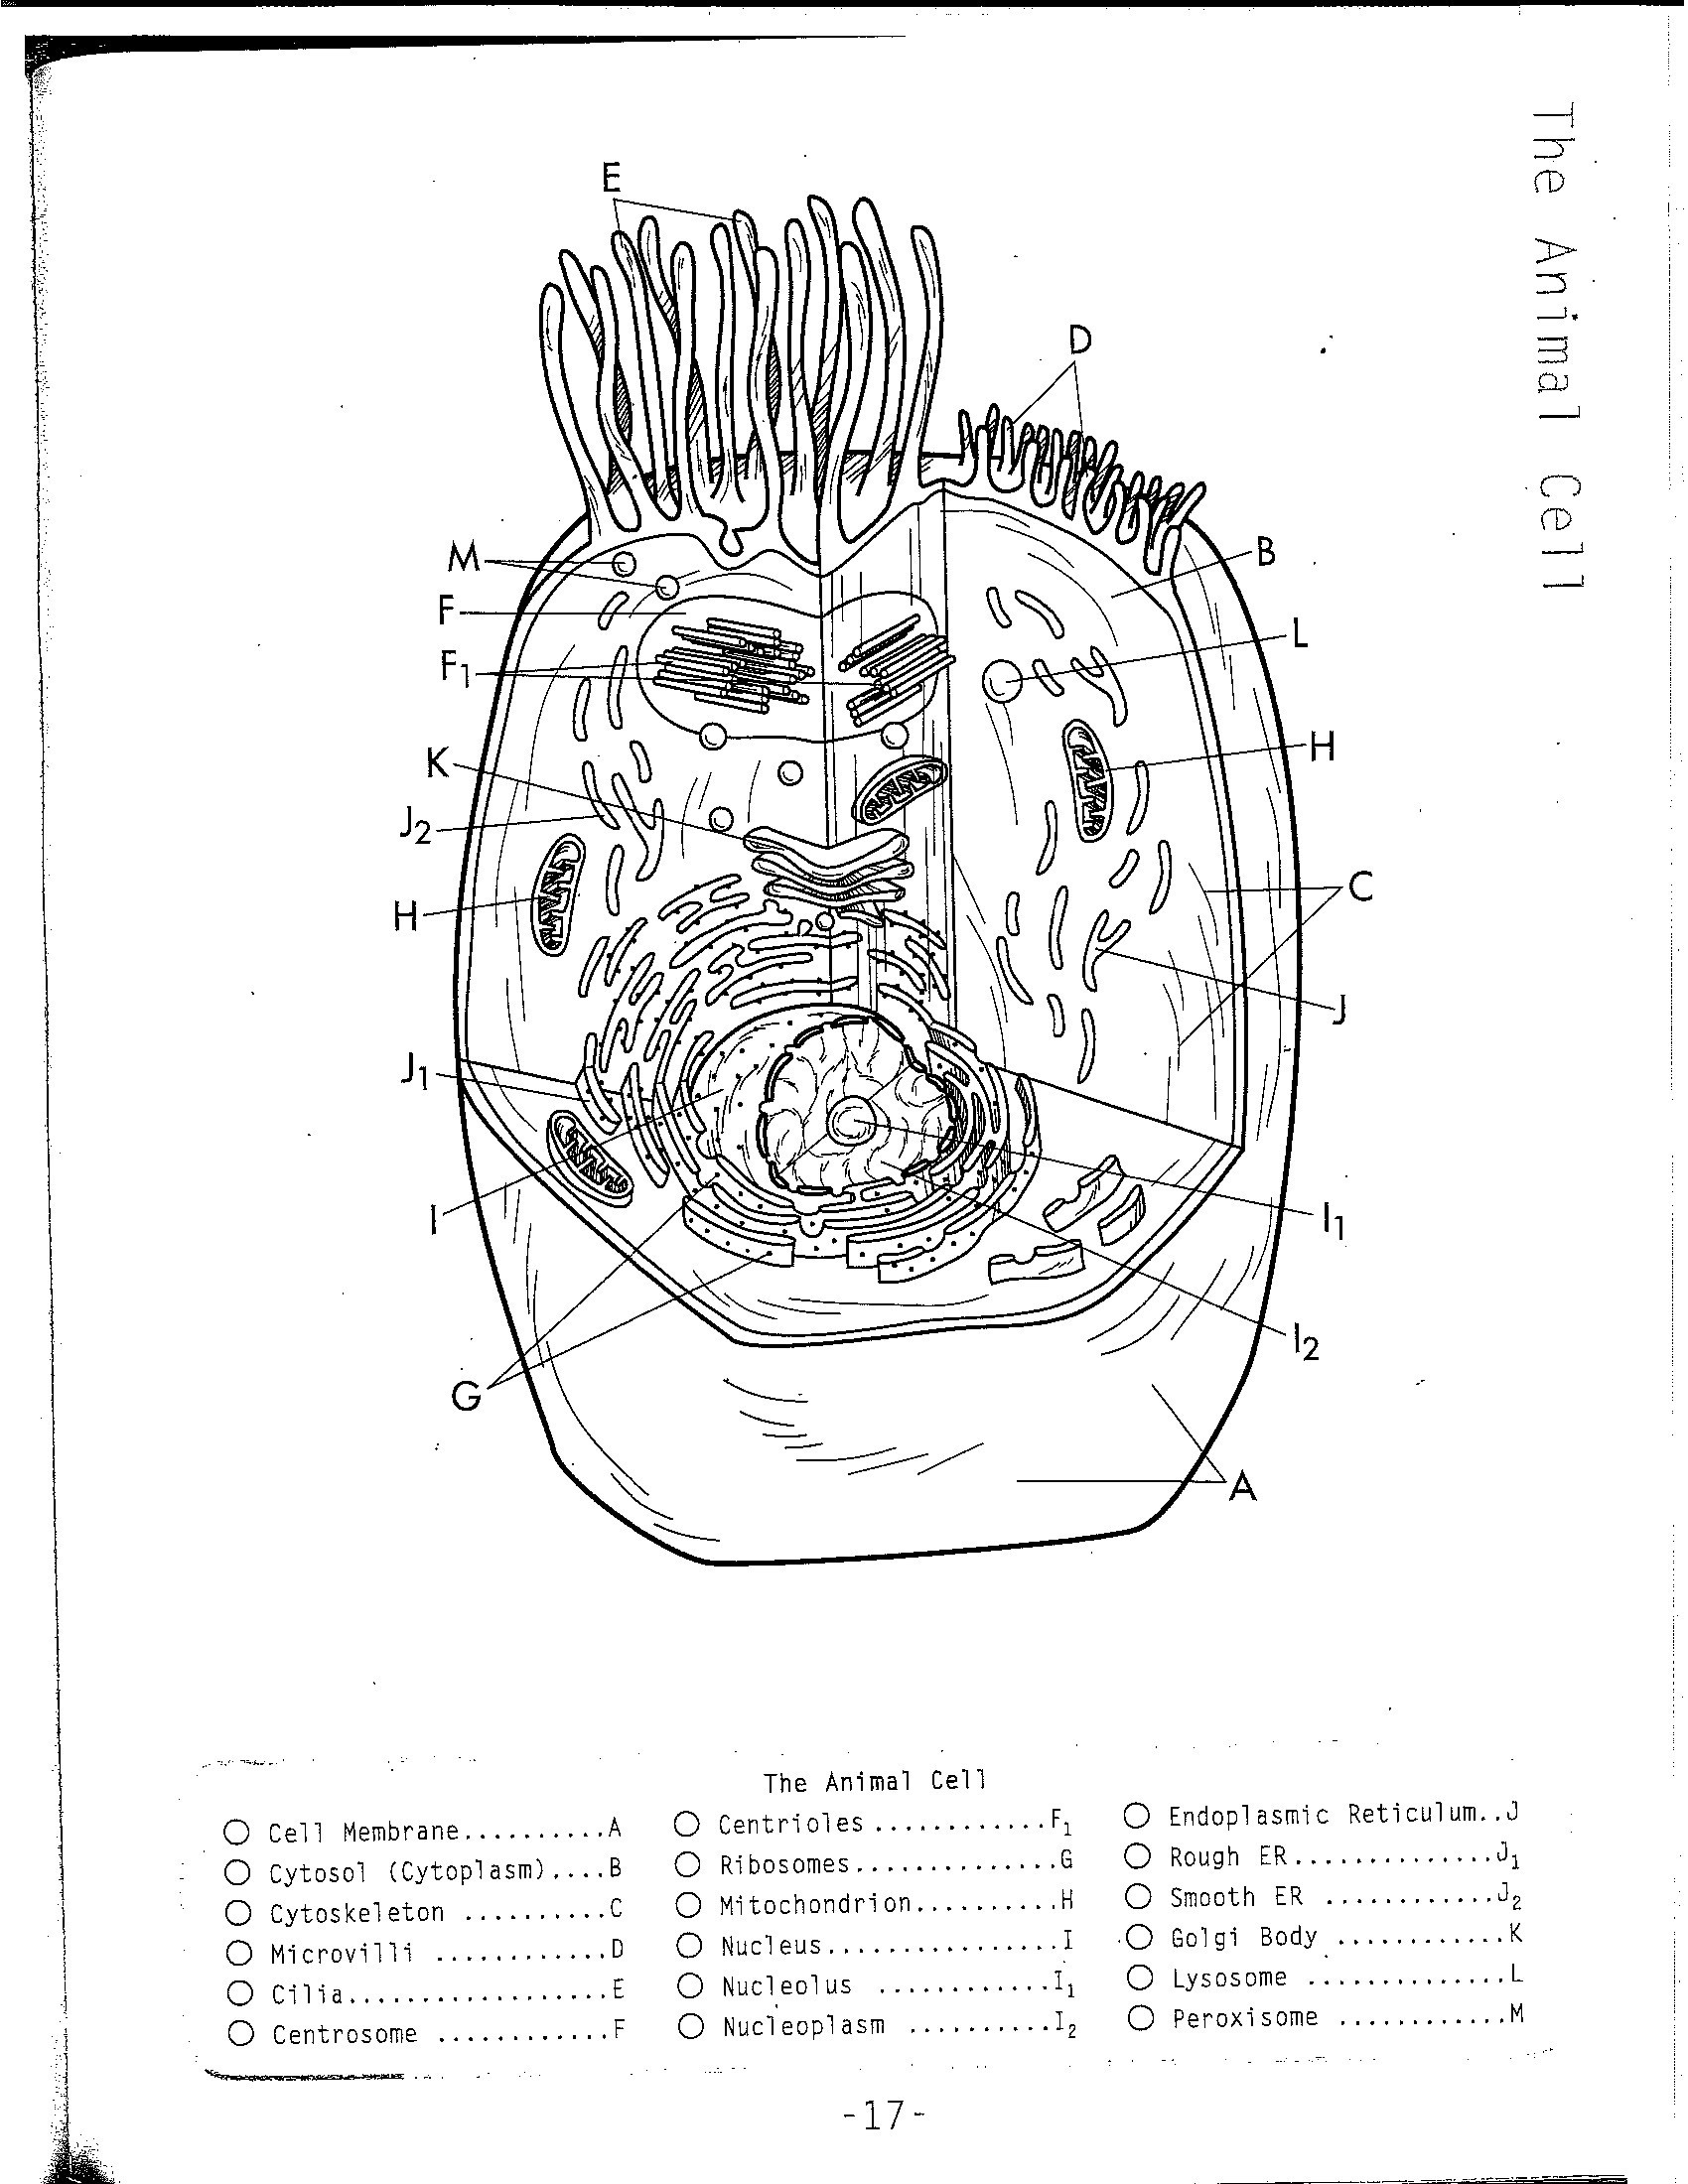 Plant Cell Coloring Worksheet Coloring Animal Cell Coloring Sheet Coloring Pages Best